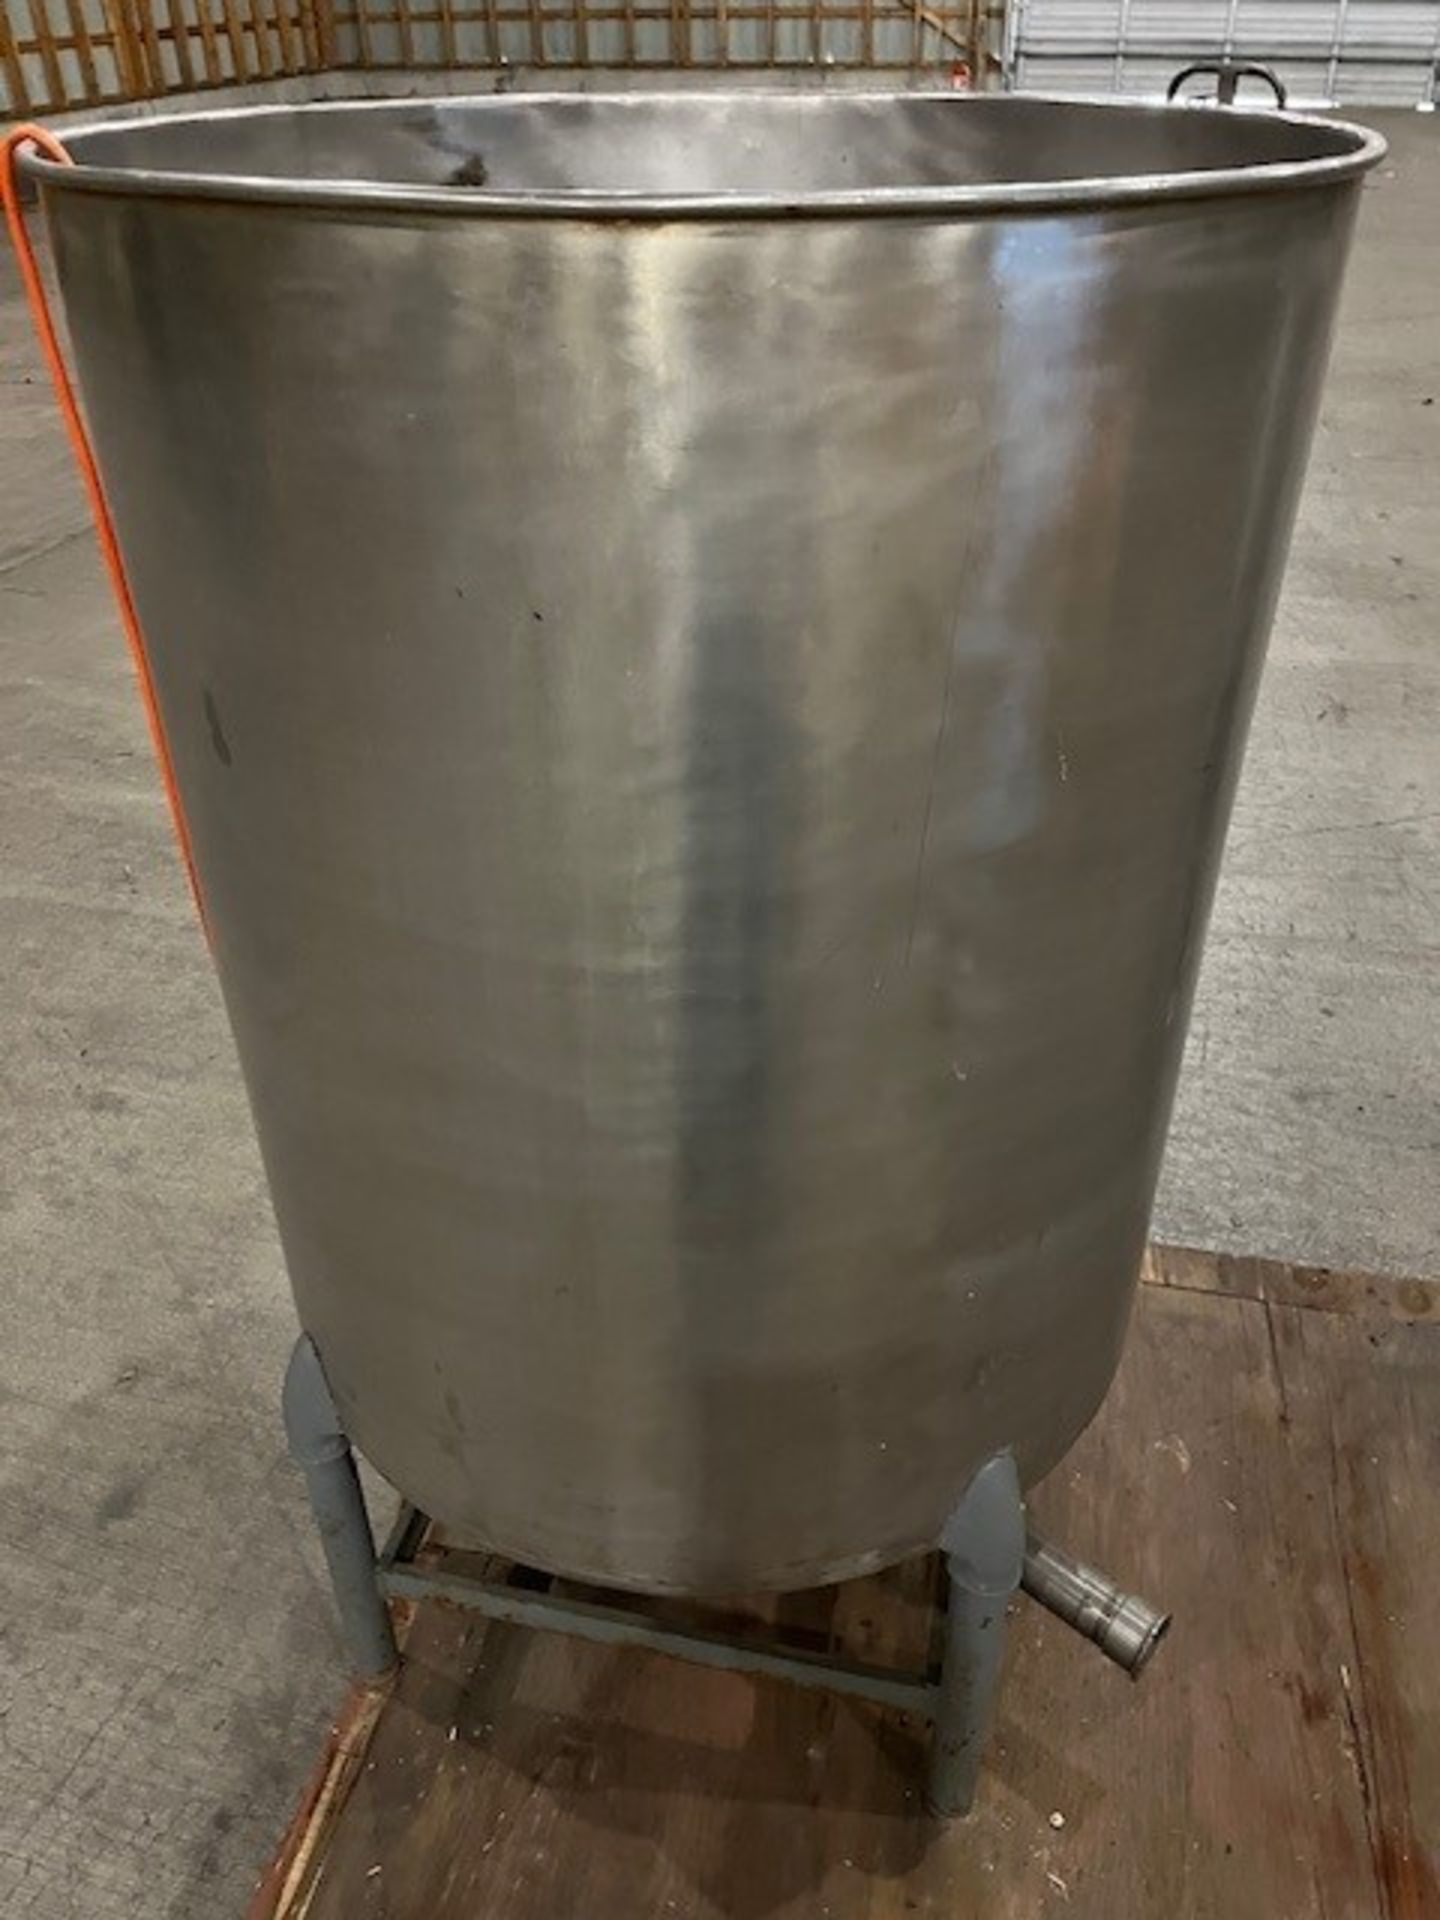 Consignment Item - located in Breese IL: Small mixing tank with motor - Image 3 of 3